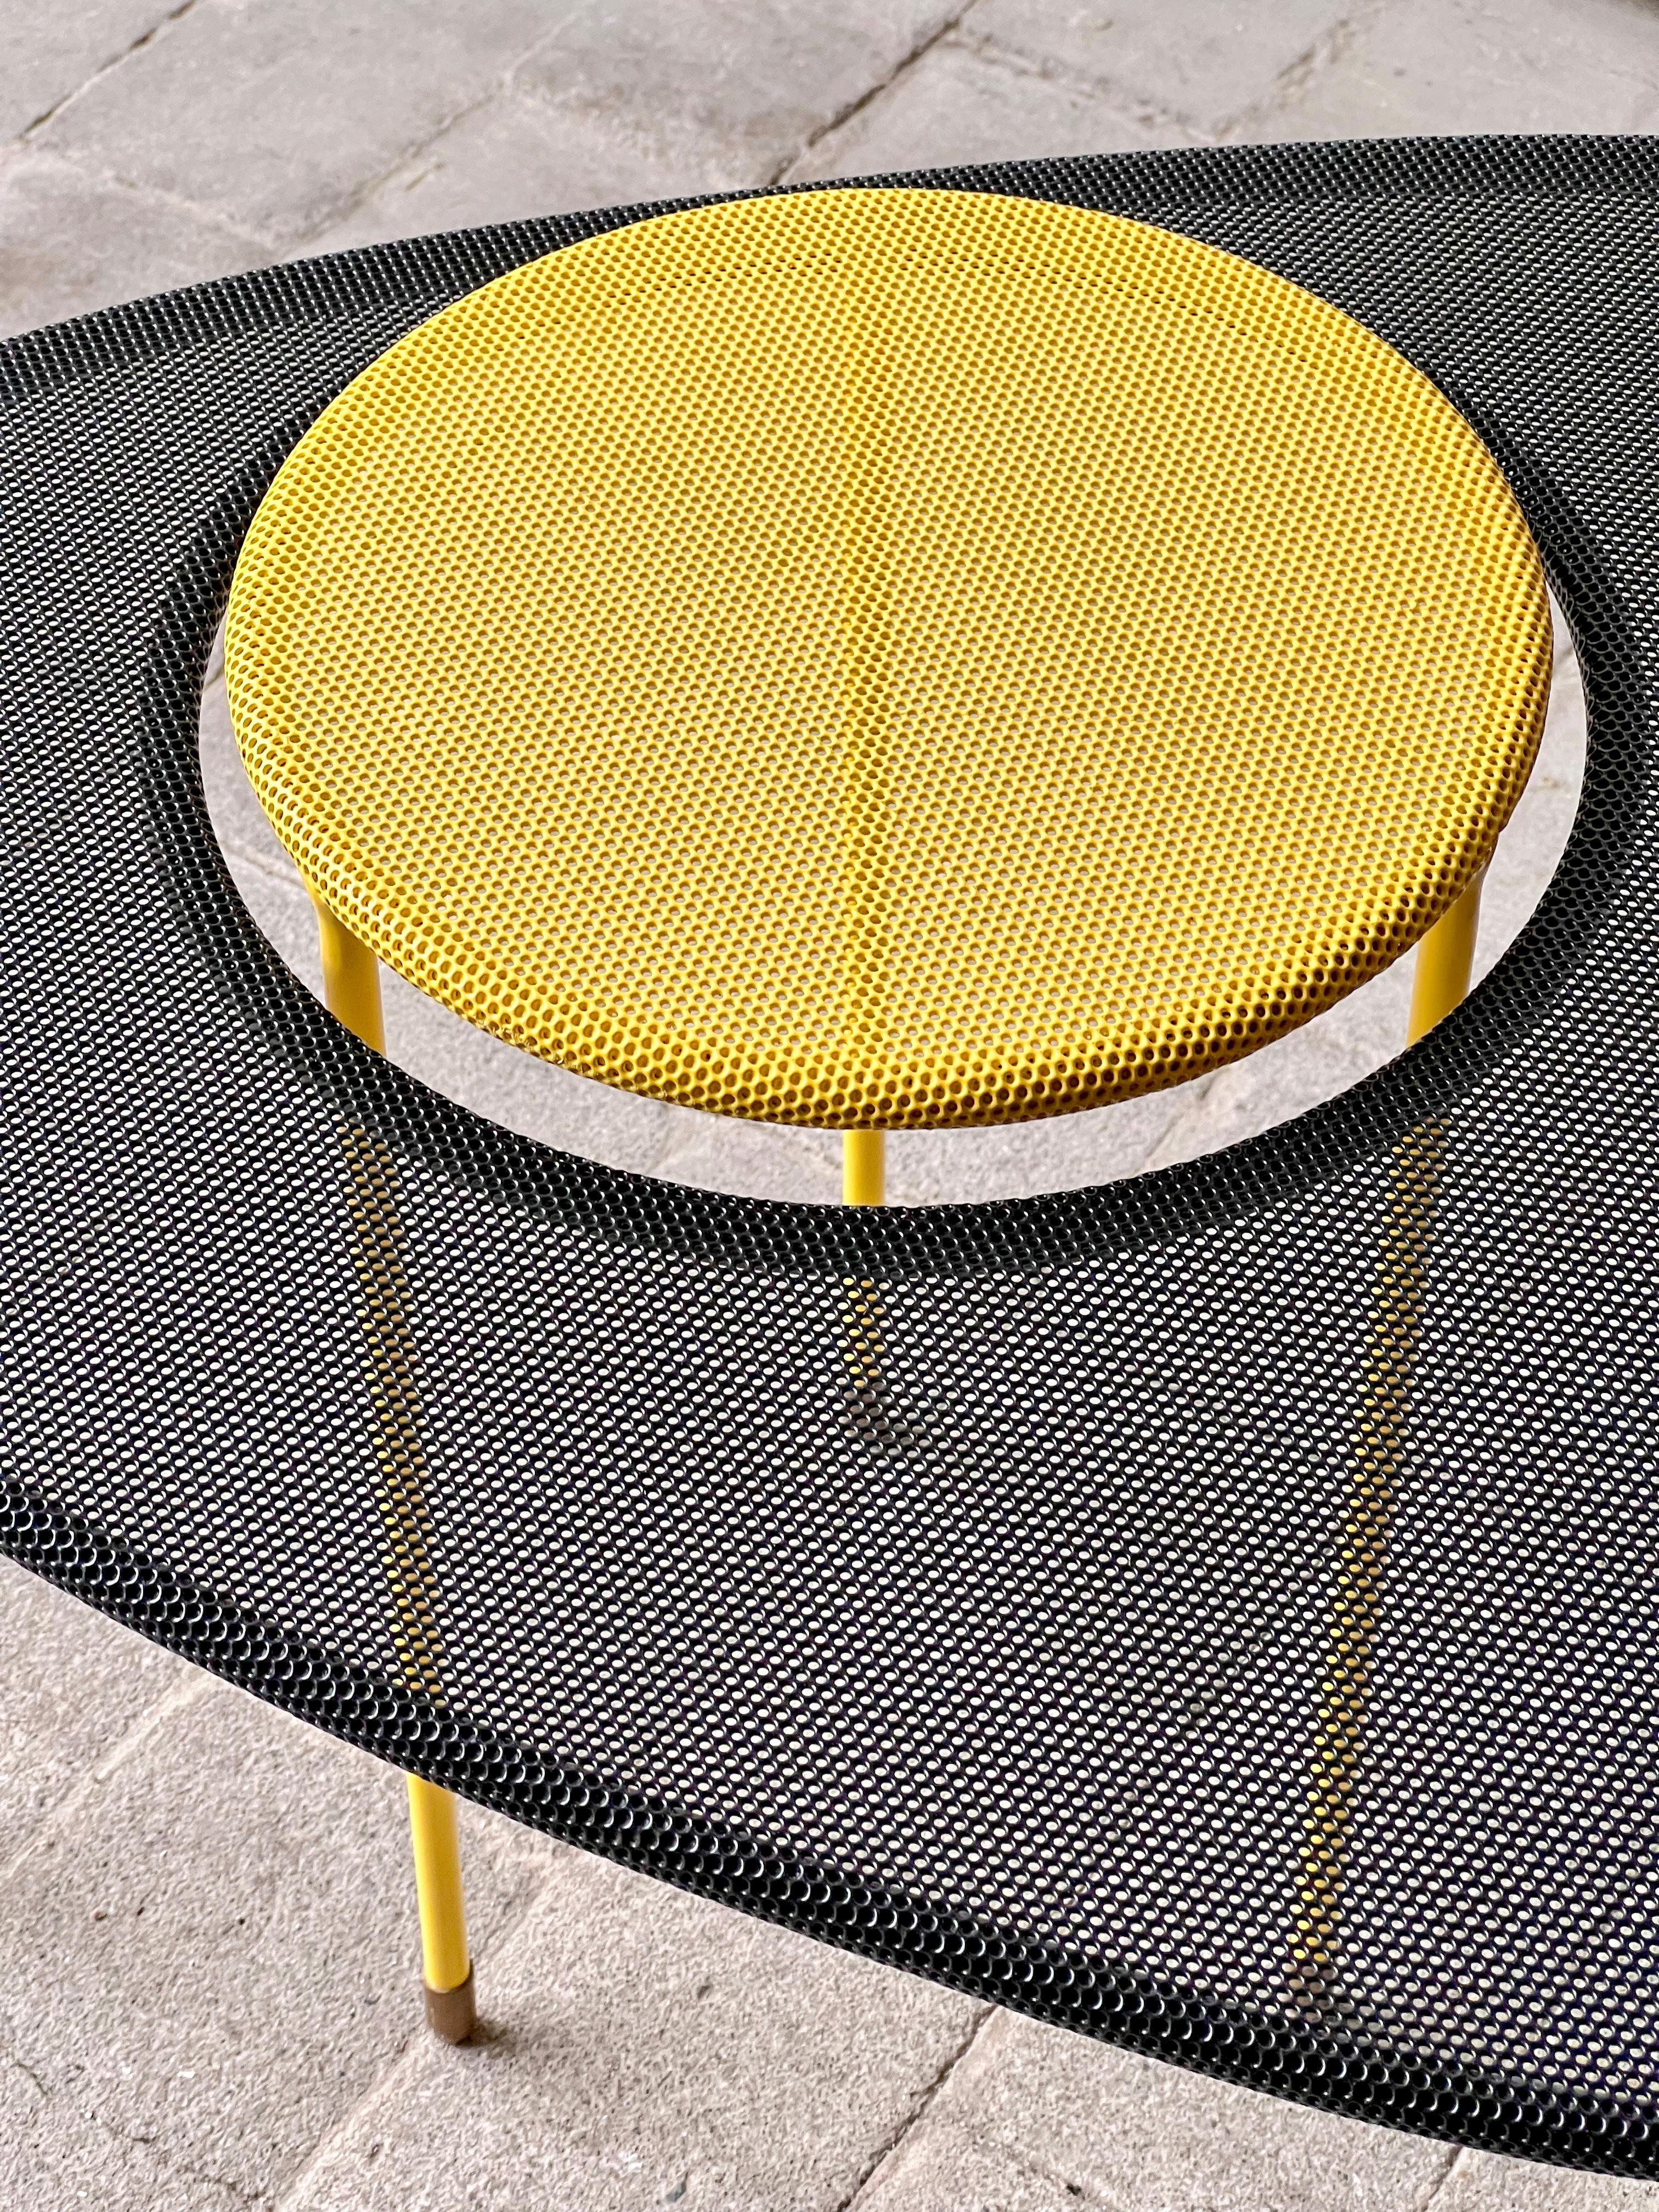 Mid-Century Modern Mathieu Mategot Kangaroo side tables, set of two in black & yellow, for Gubi For Sale